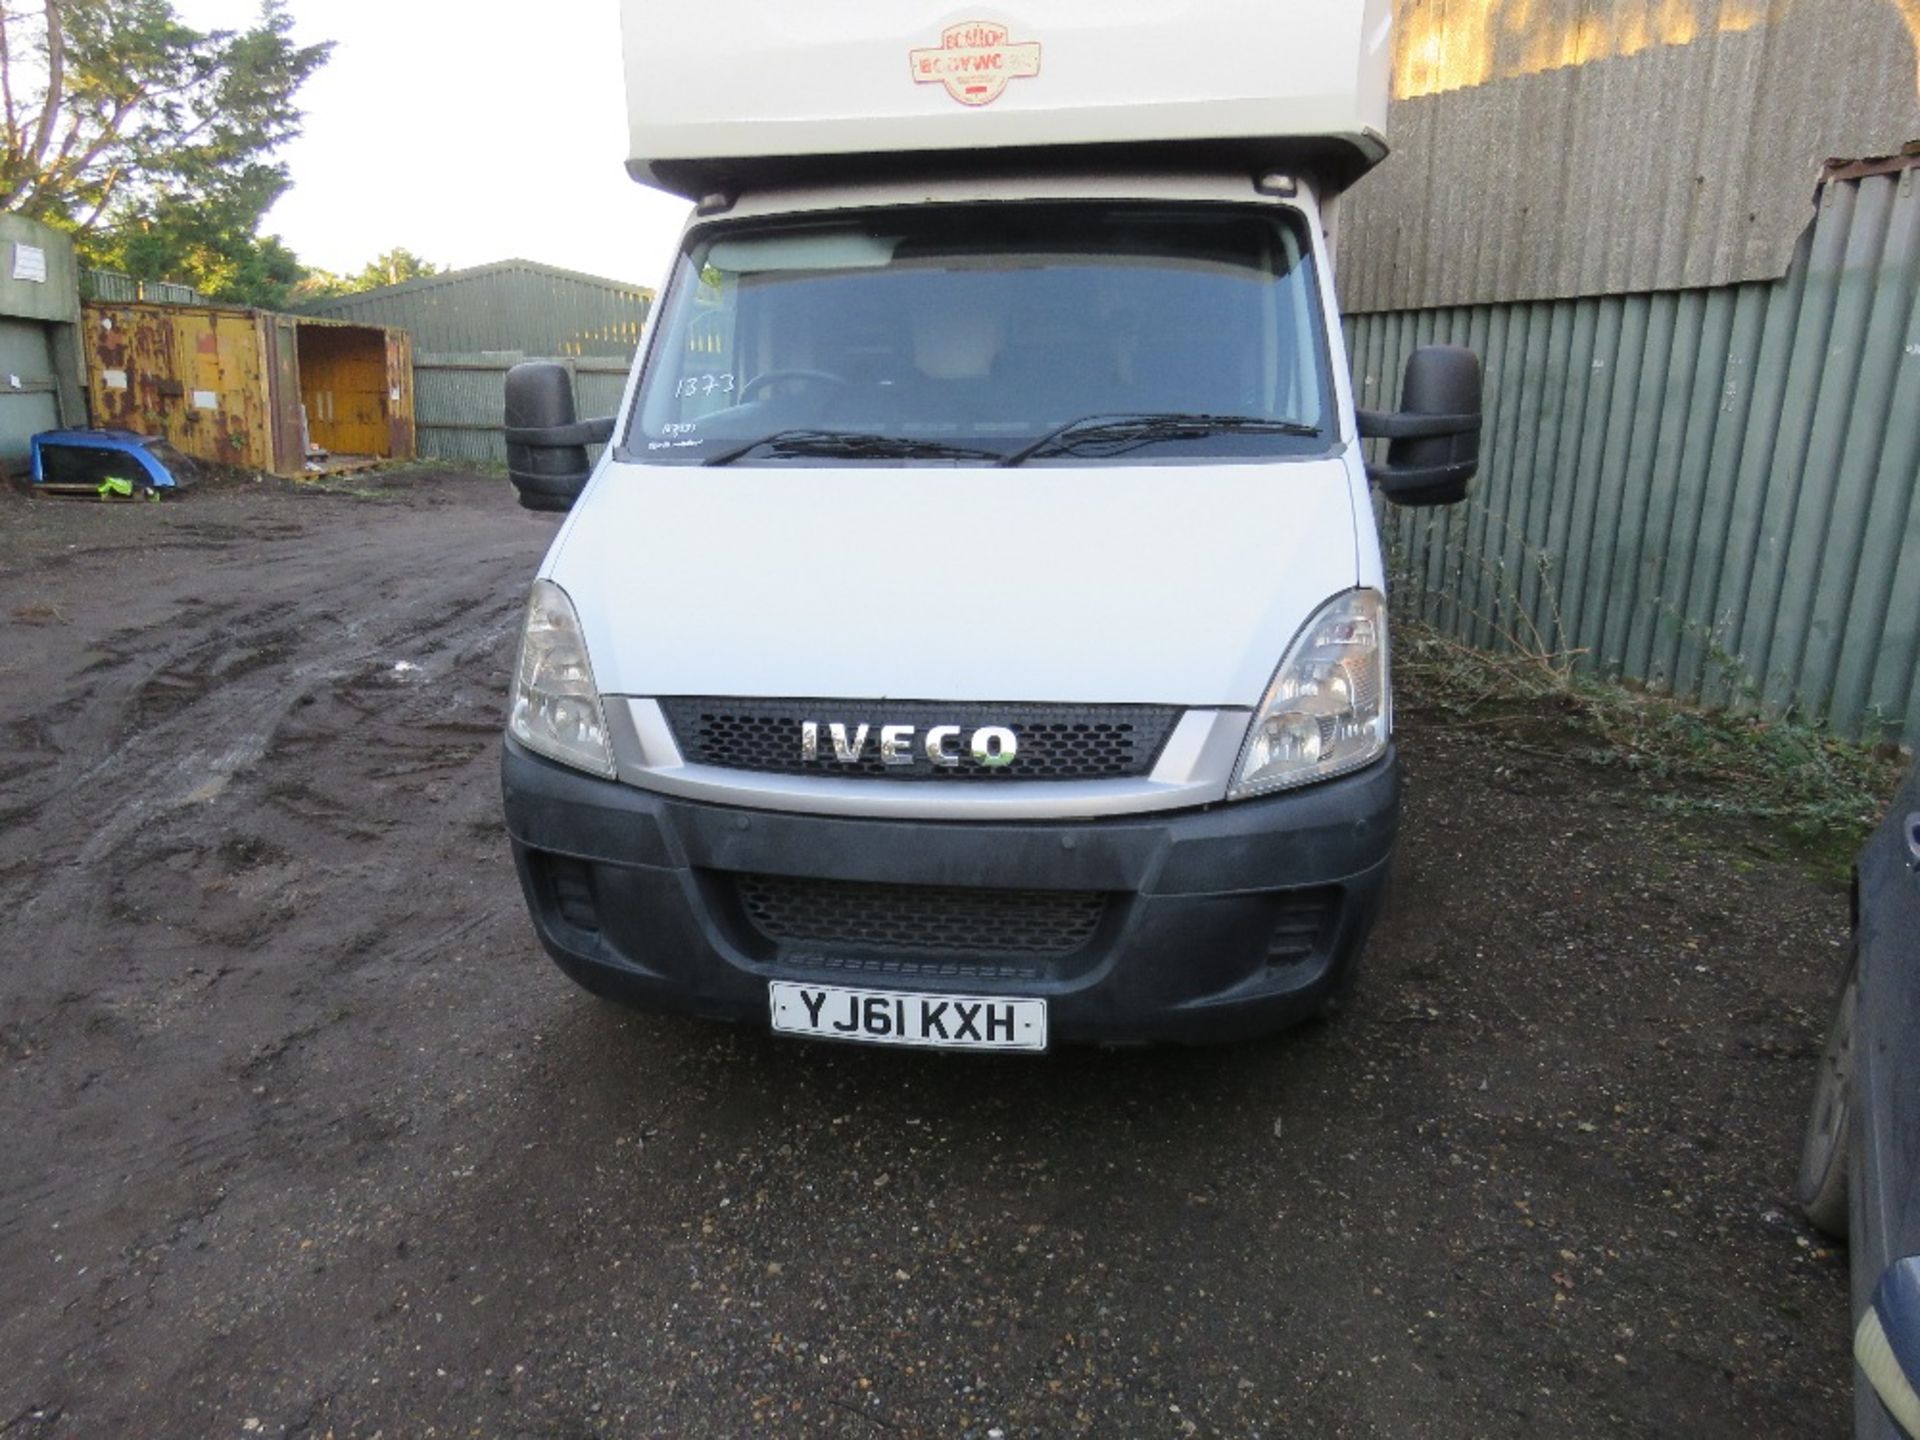 IVECO 35S11 CURTAIN SIDED TRUCK REG: YJ61 KXH. 167,131 REC MILES. DIRECT FROM EVENTS COMPANY, BEIN - Image 10 of 10